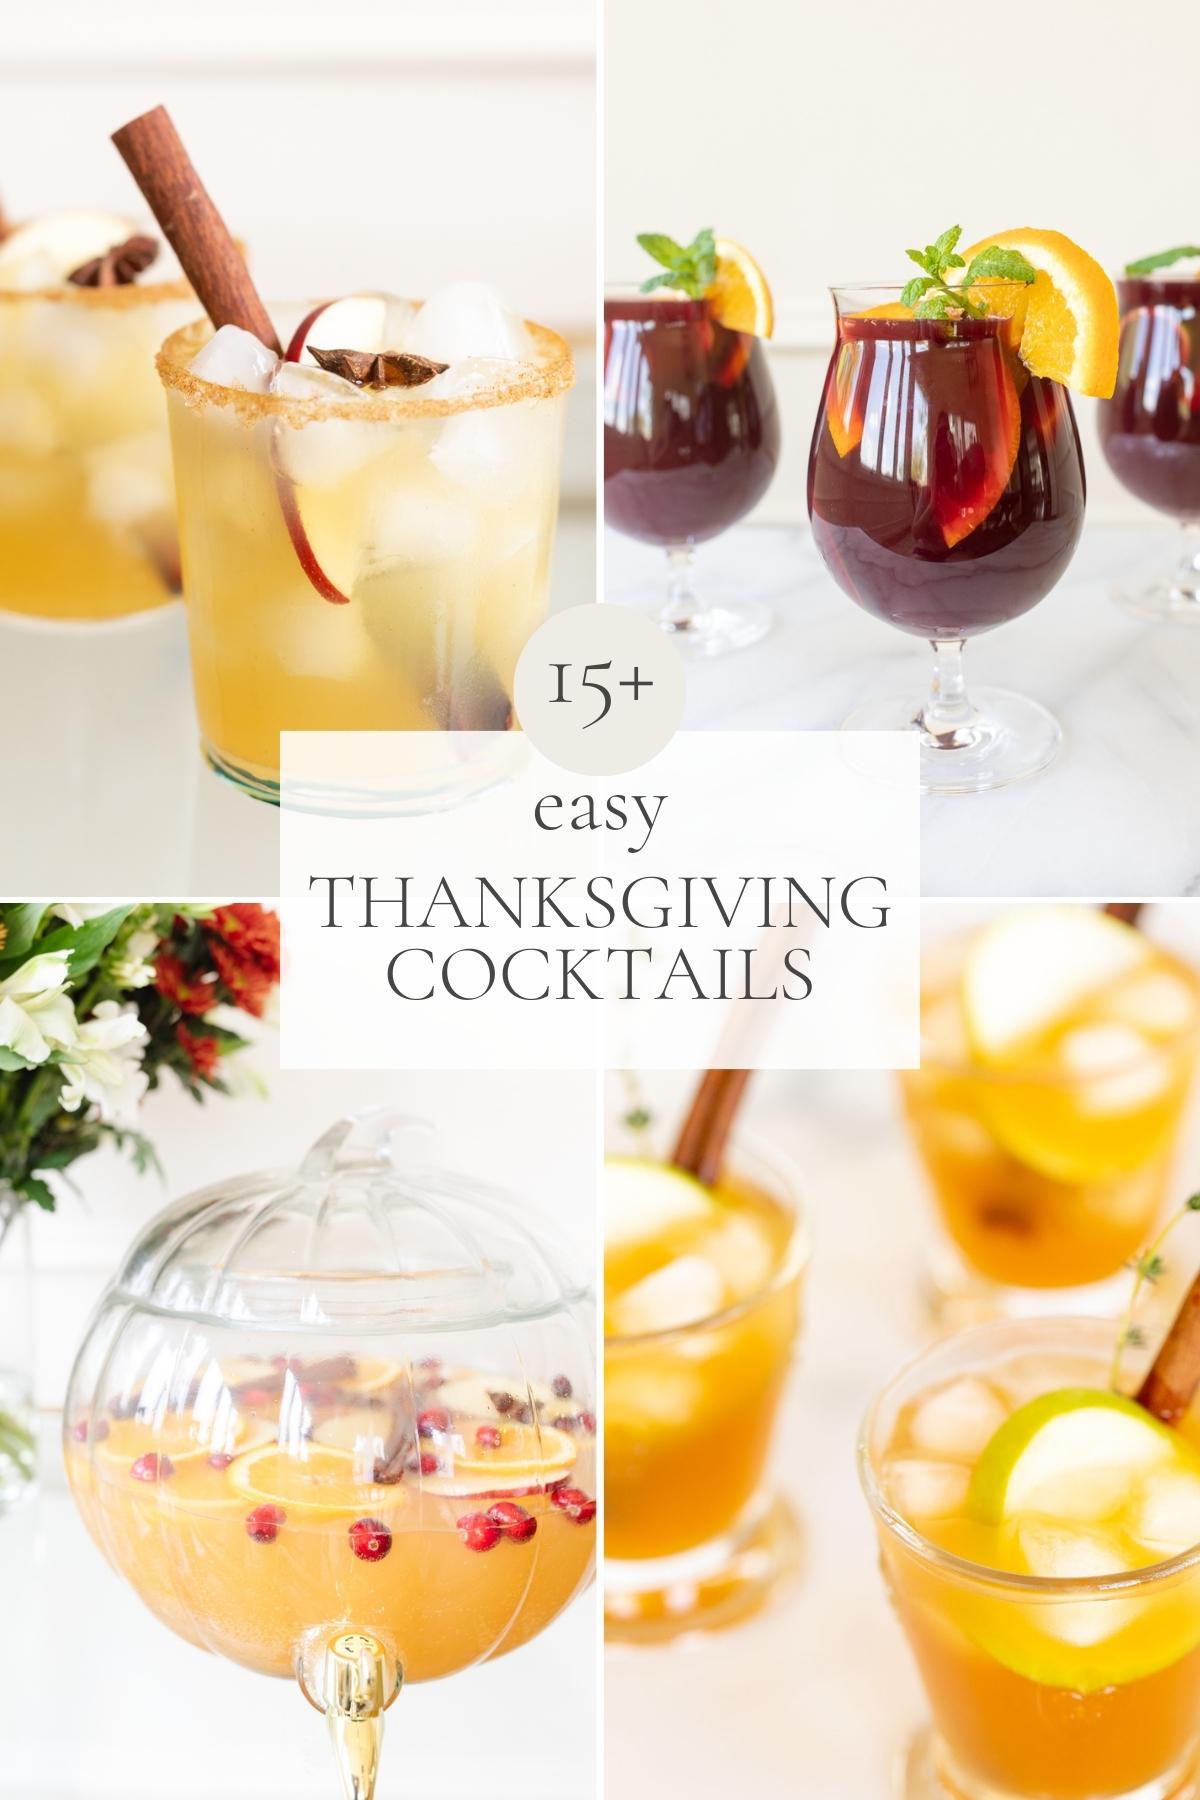 THANKSGIVING COCKTAILS 10